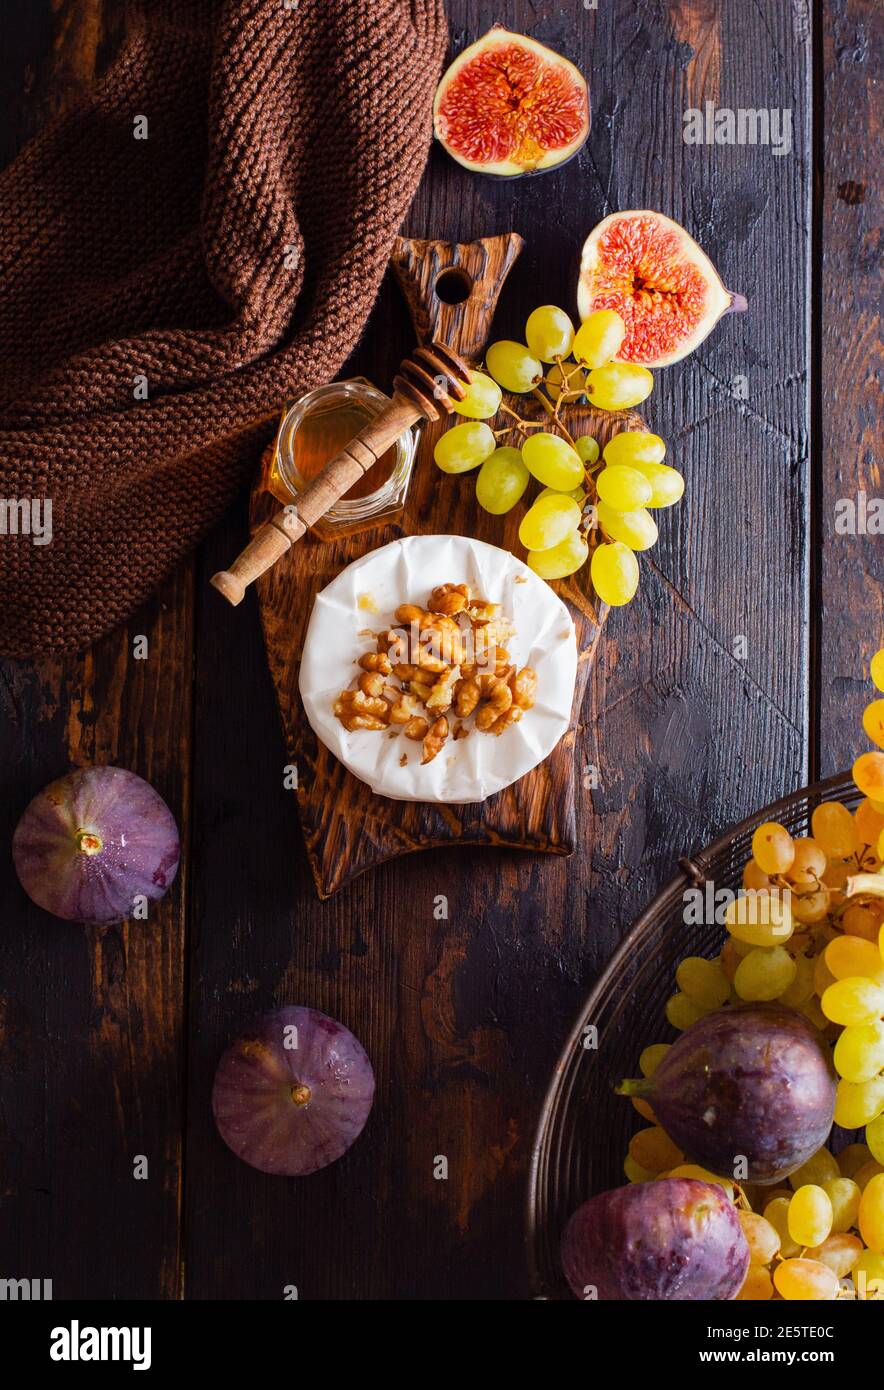 Vintage retro concept. Fresh grapes and figs on an old wooden background in retro style. Top view. Stock Photo